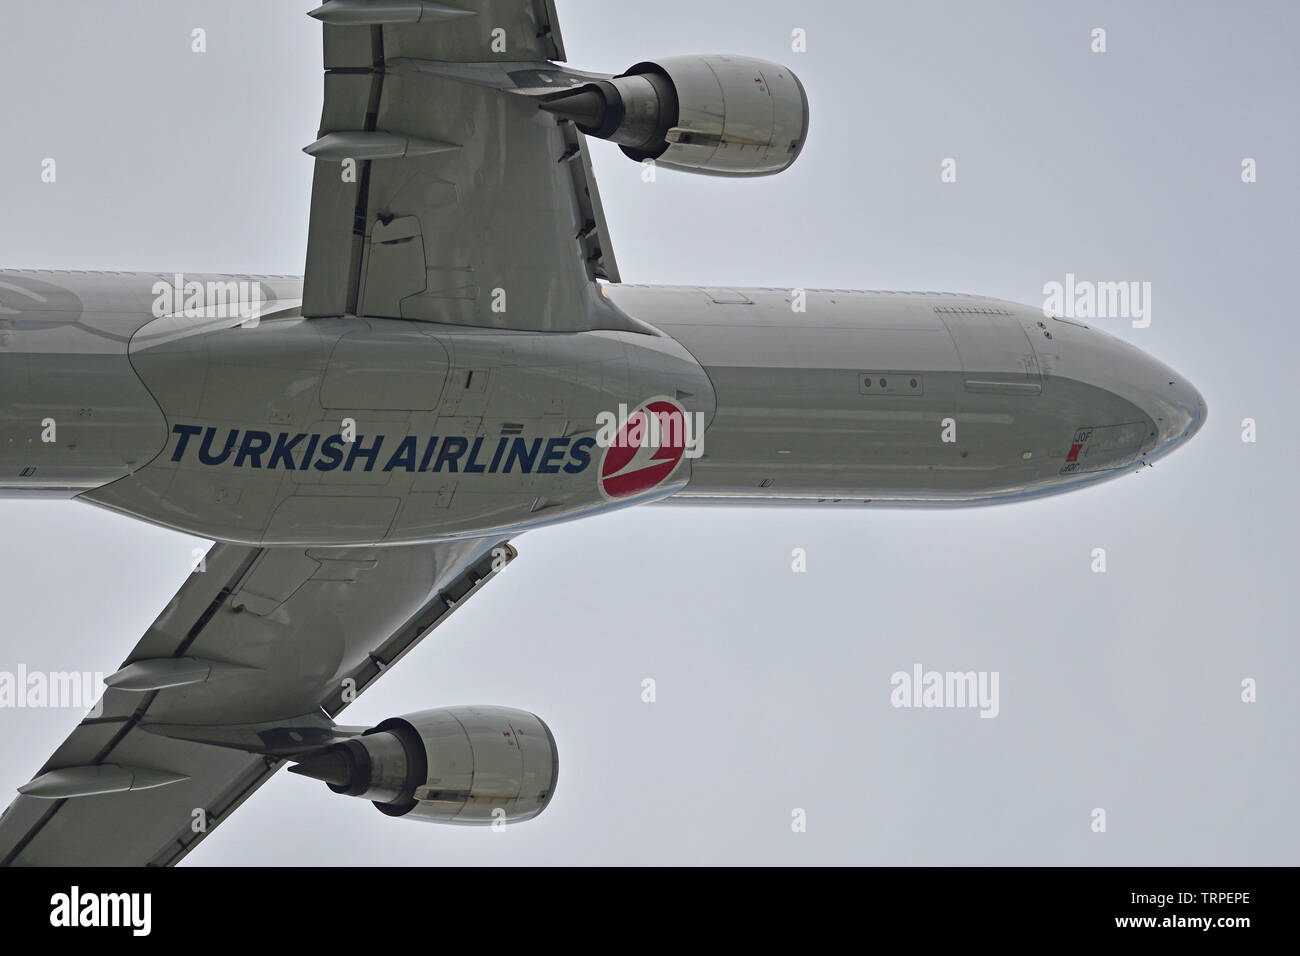 Turkish Airlines A330 airplane takes off from London's Heathrow Airport over residential homes in west London. June 8, 2019. Stock Photo